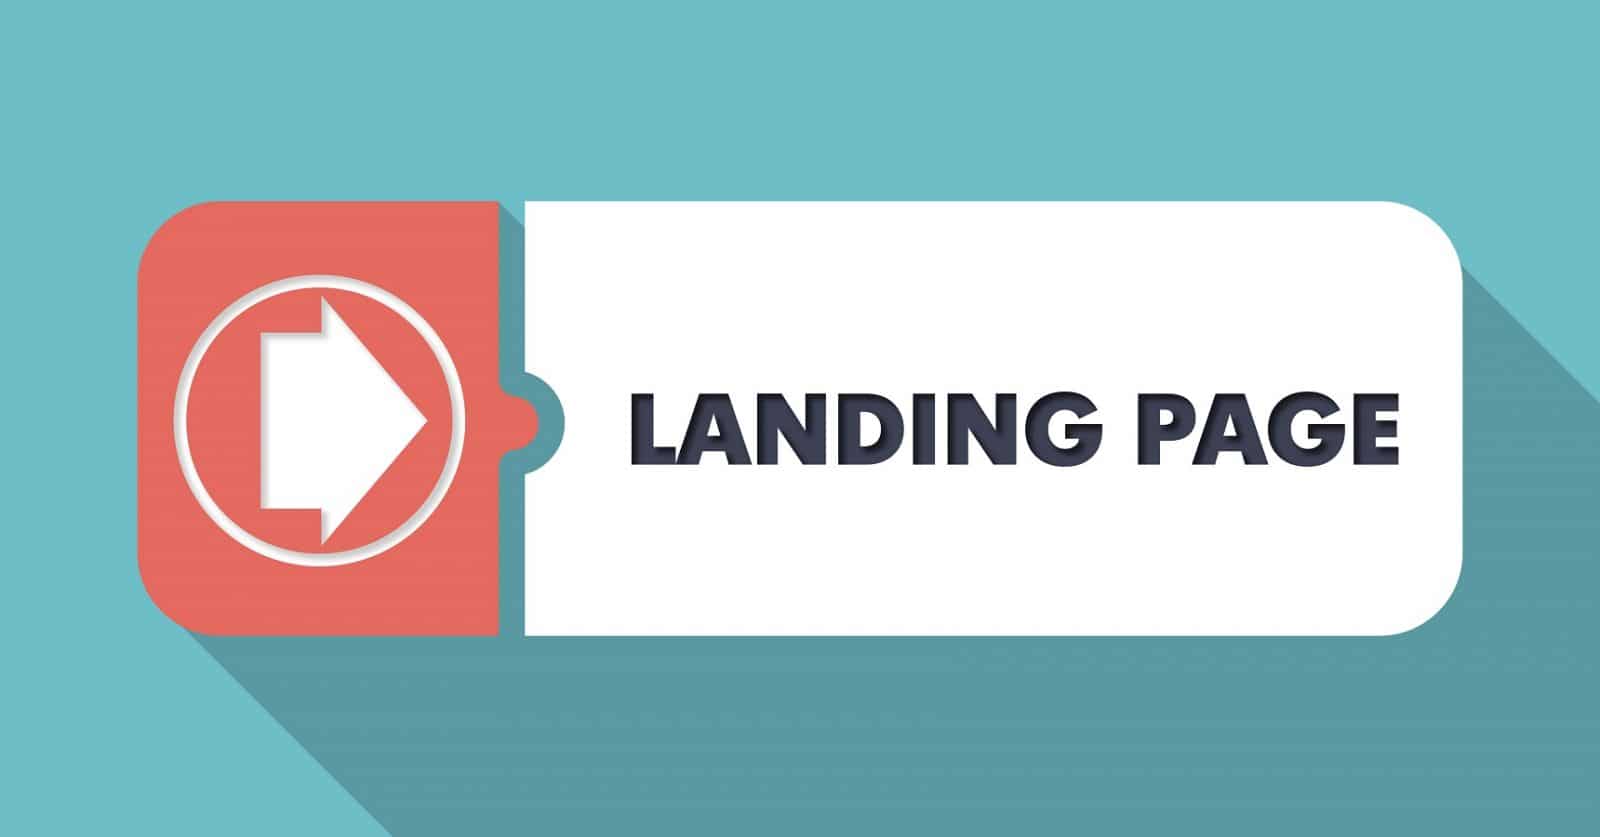 Common copywriting mistakes for landing pages